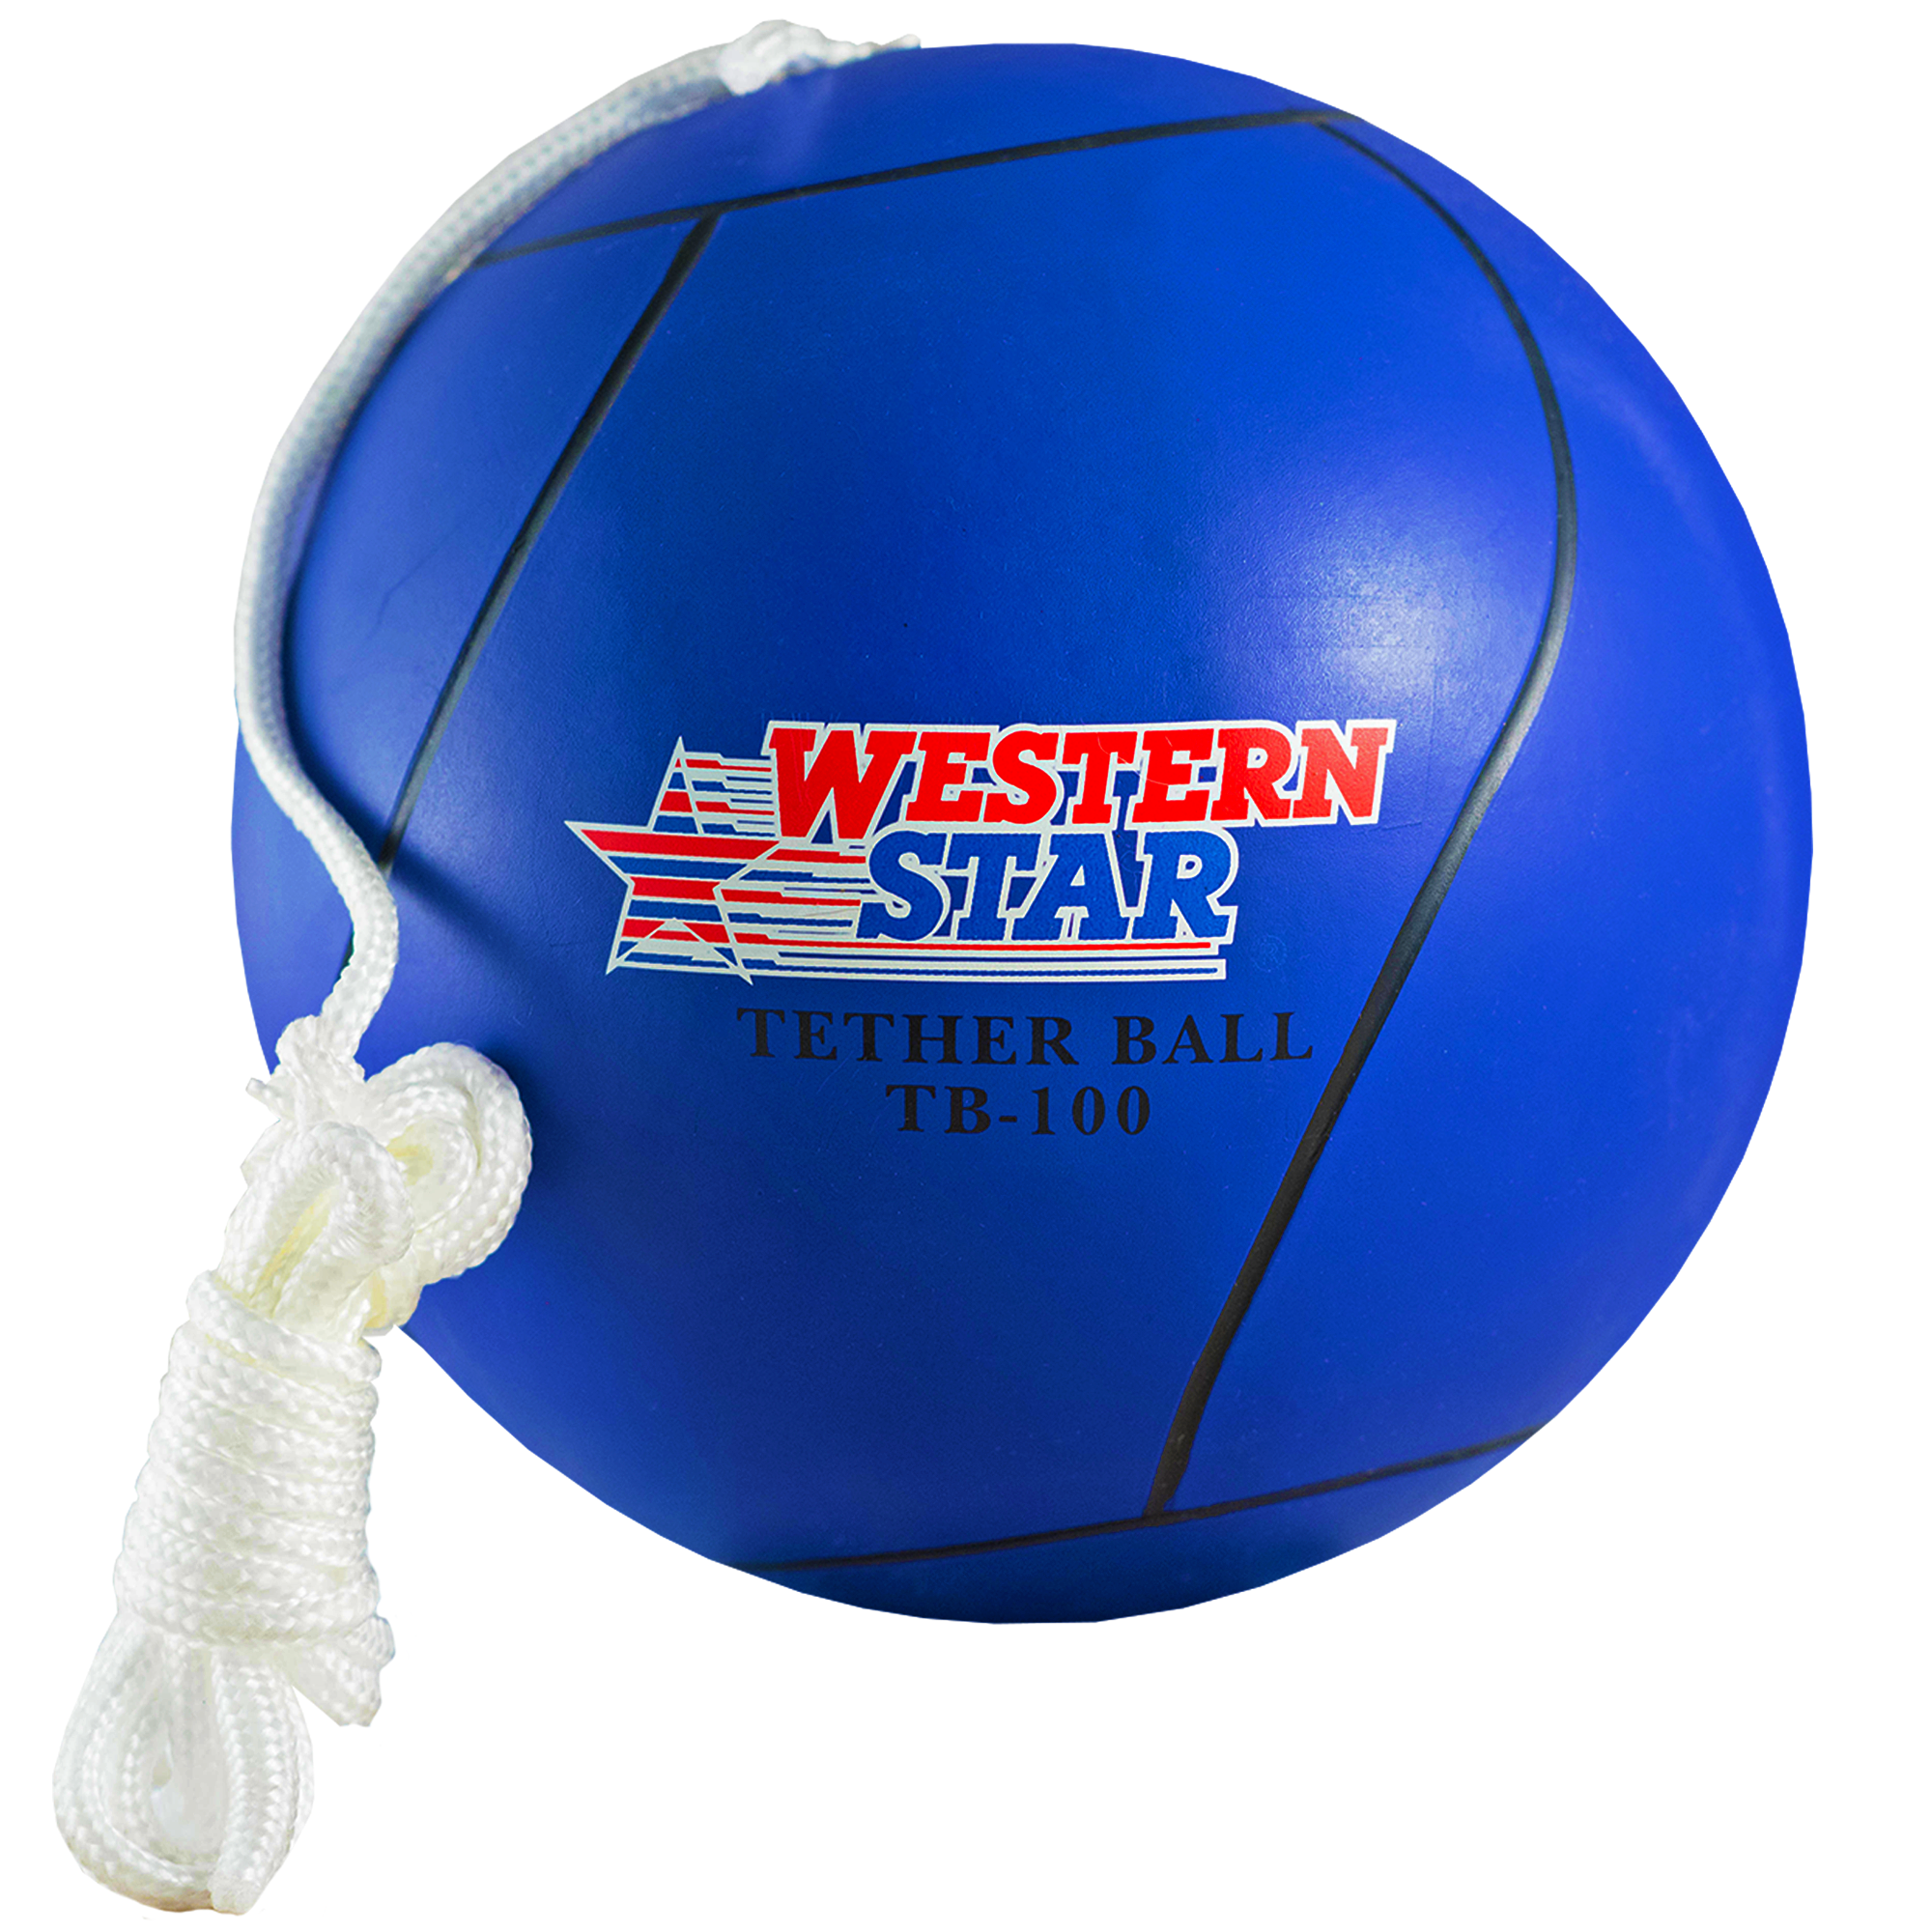 Western Star Tetherball with Rope for Kids Full Size - Premium